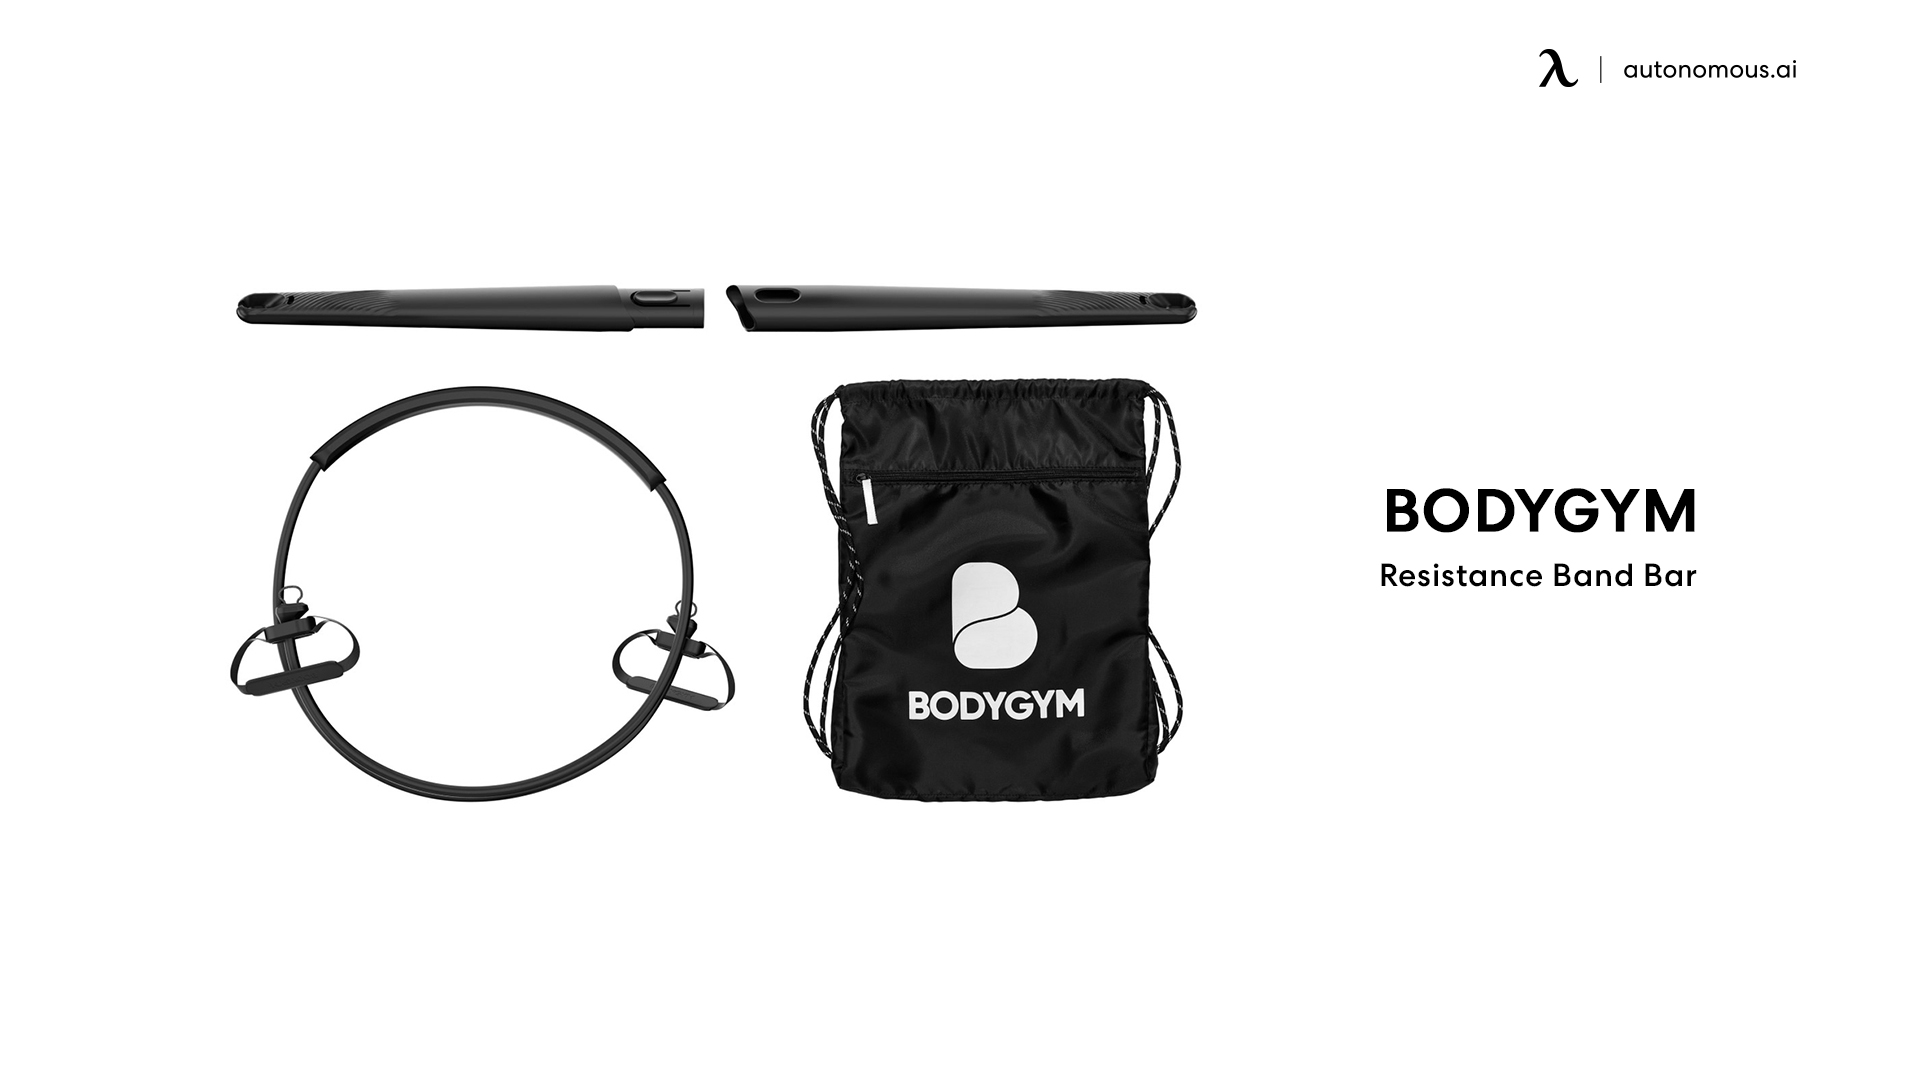 Portable Gym Equipment Like BODYGYM 2.0 in bedroom gym